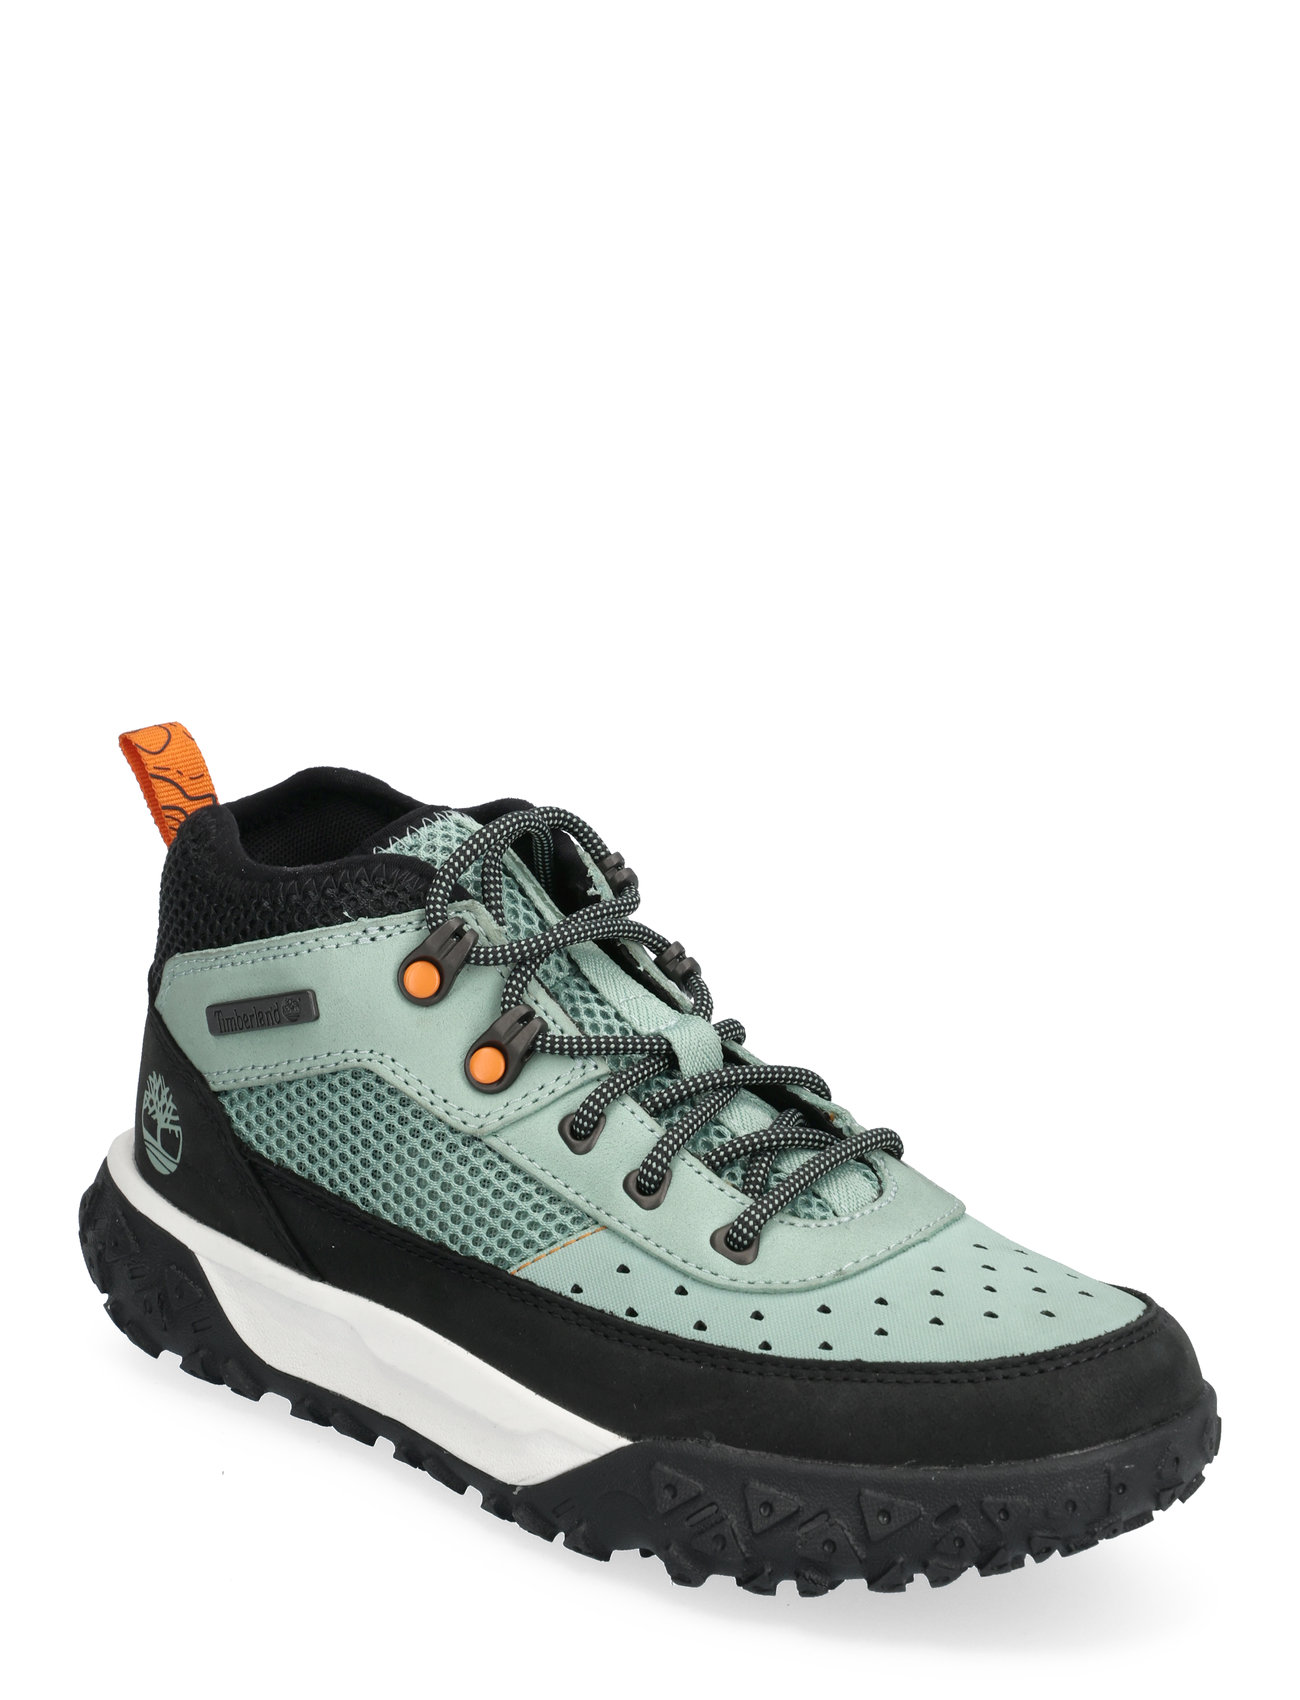 Greenstride Motion 6 Low Lace Up Hiking Boot Light Green Shoes Sports Shoes Running-training Shoes Green Timberland